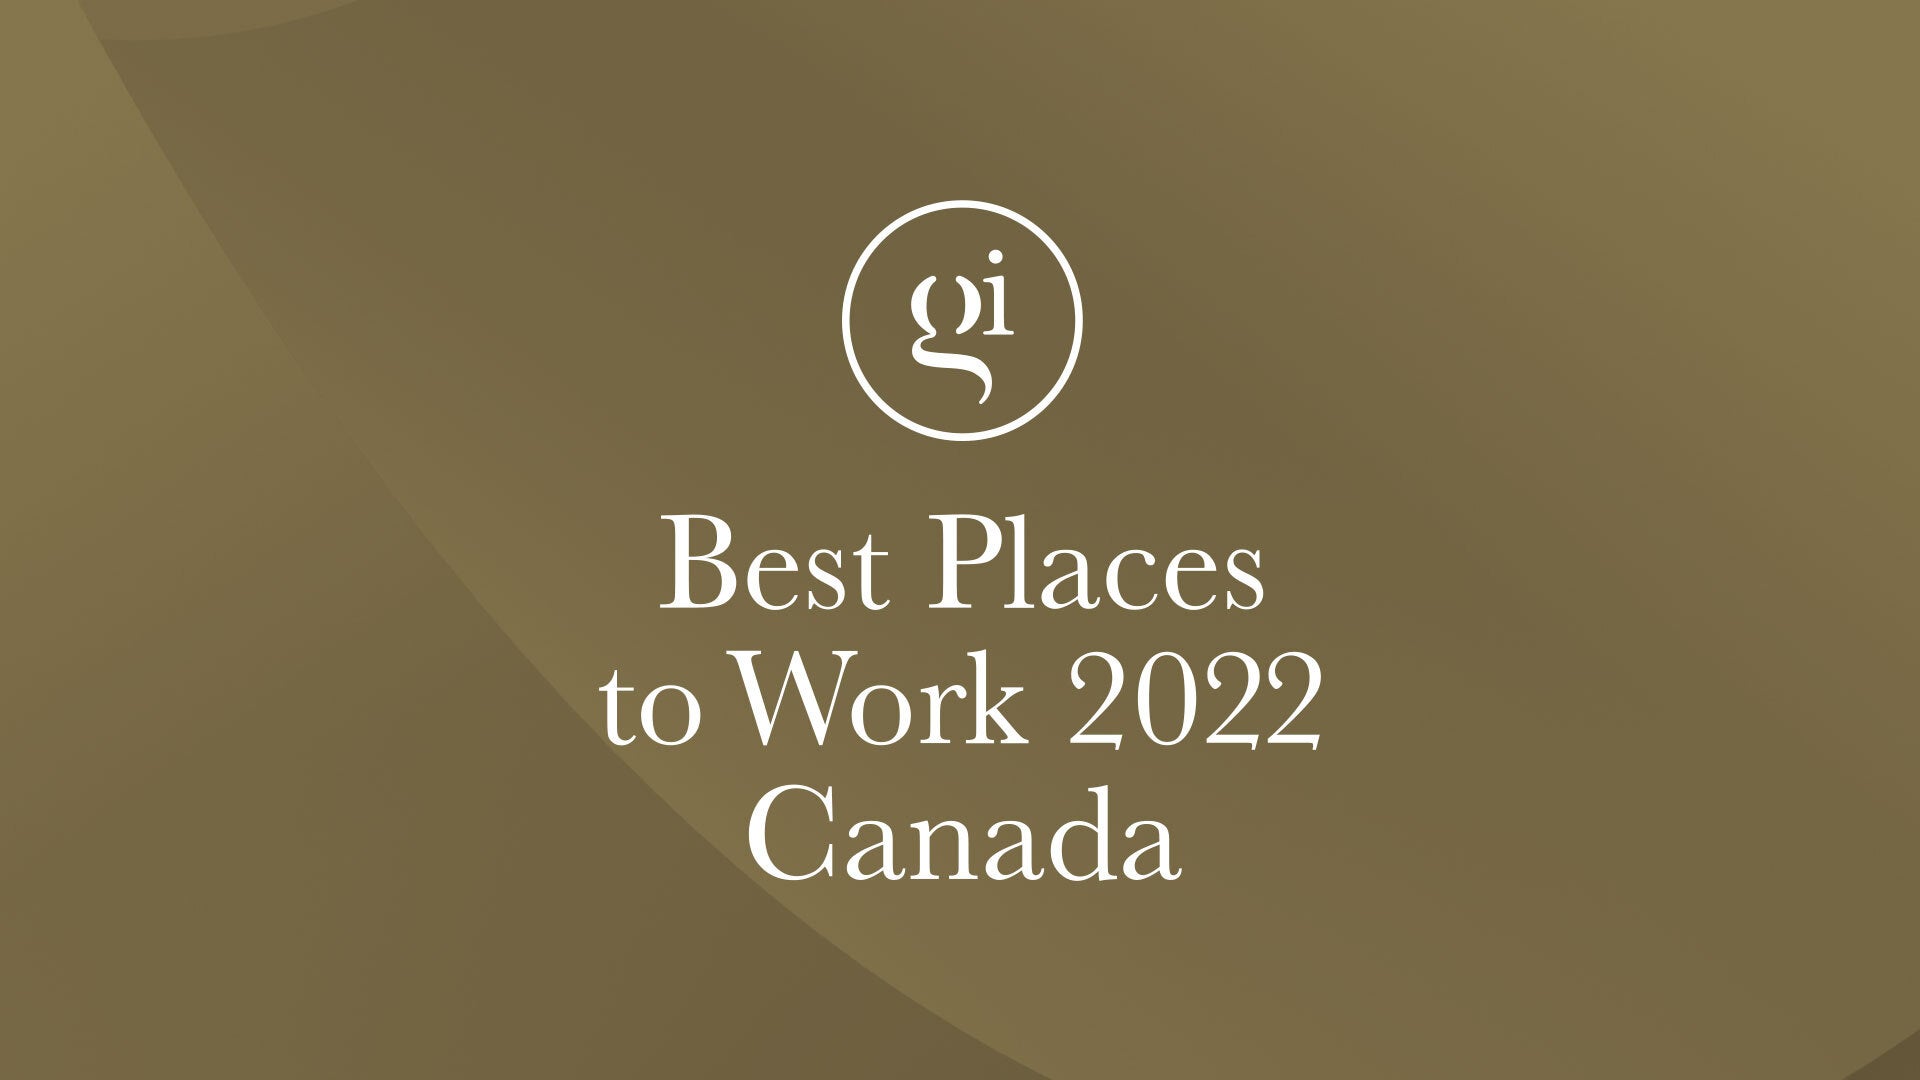 Image for Revealed: The finalists for the 2022 Canada Best Places To Work Awards